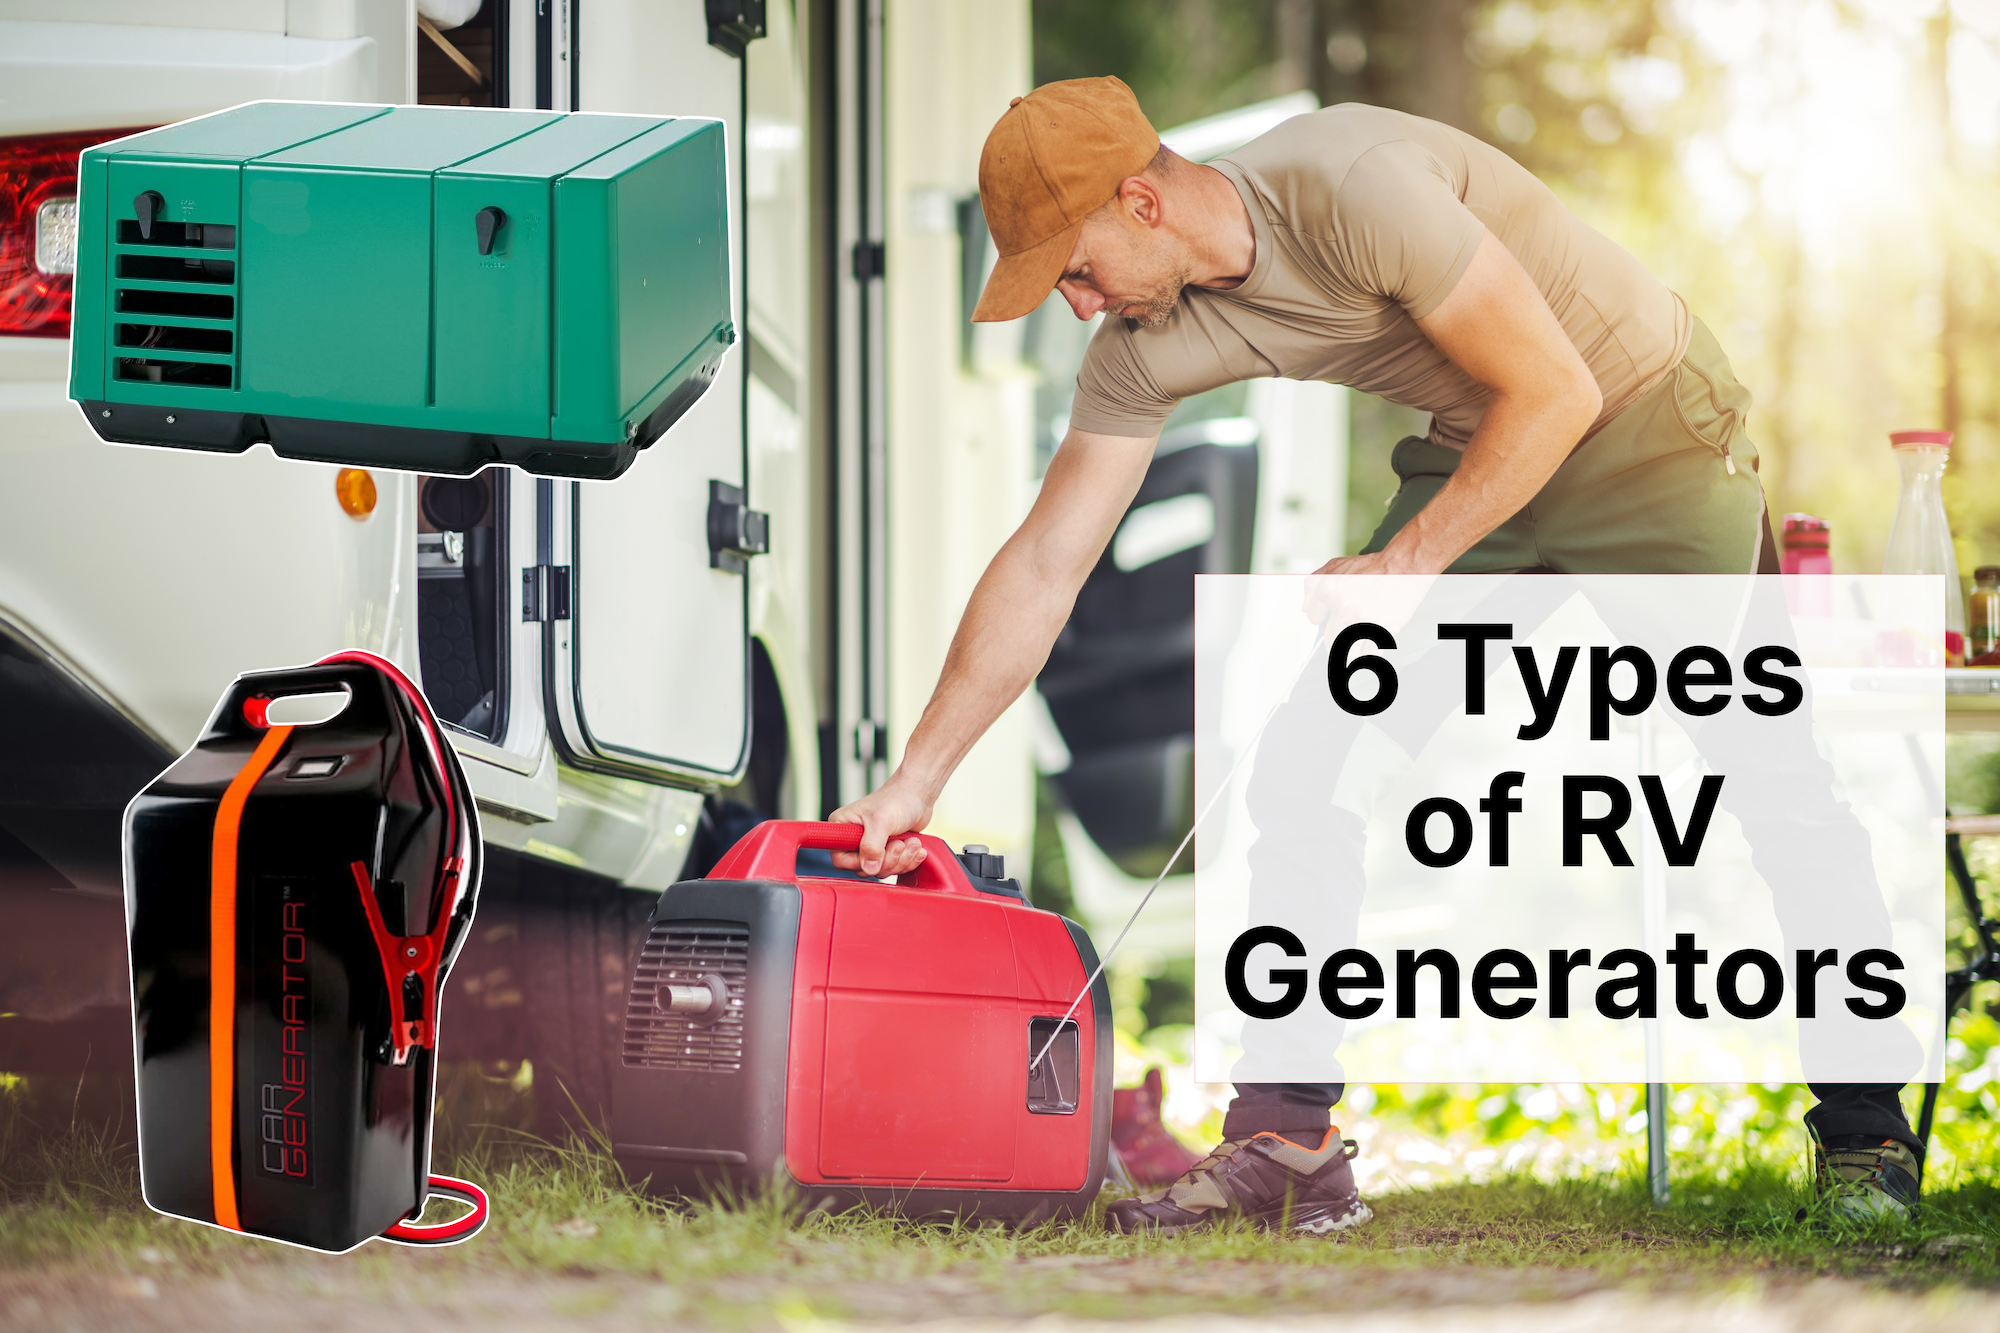 Man tries to start various types of RV generators outside of a small RV